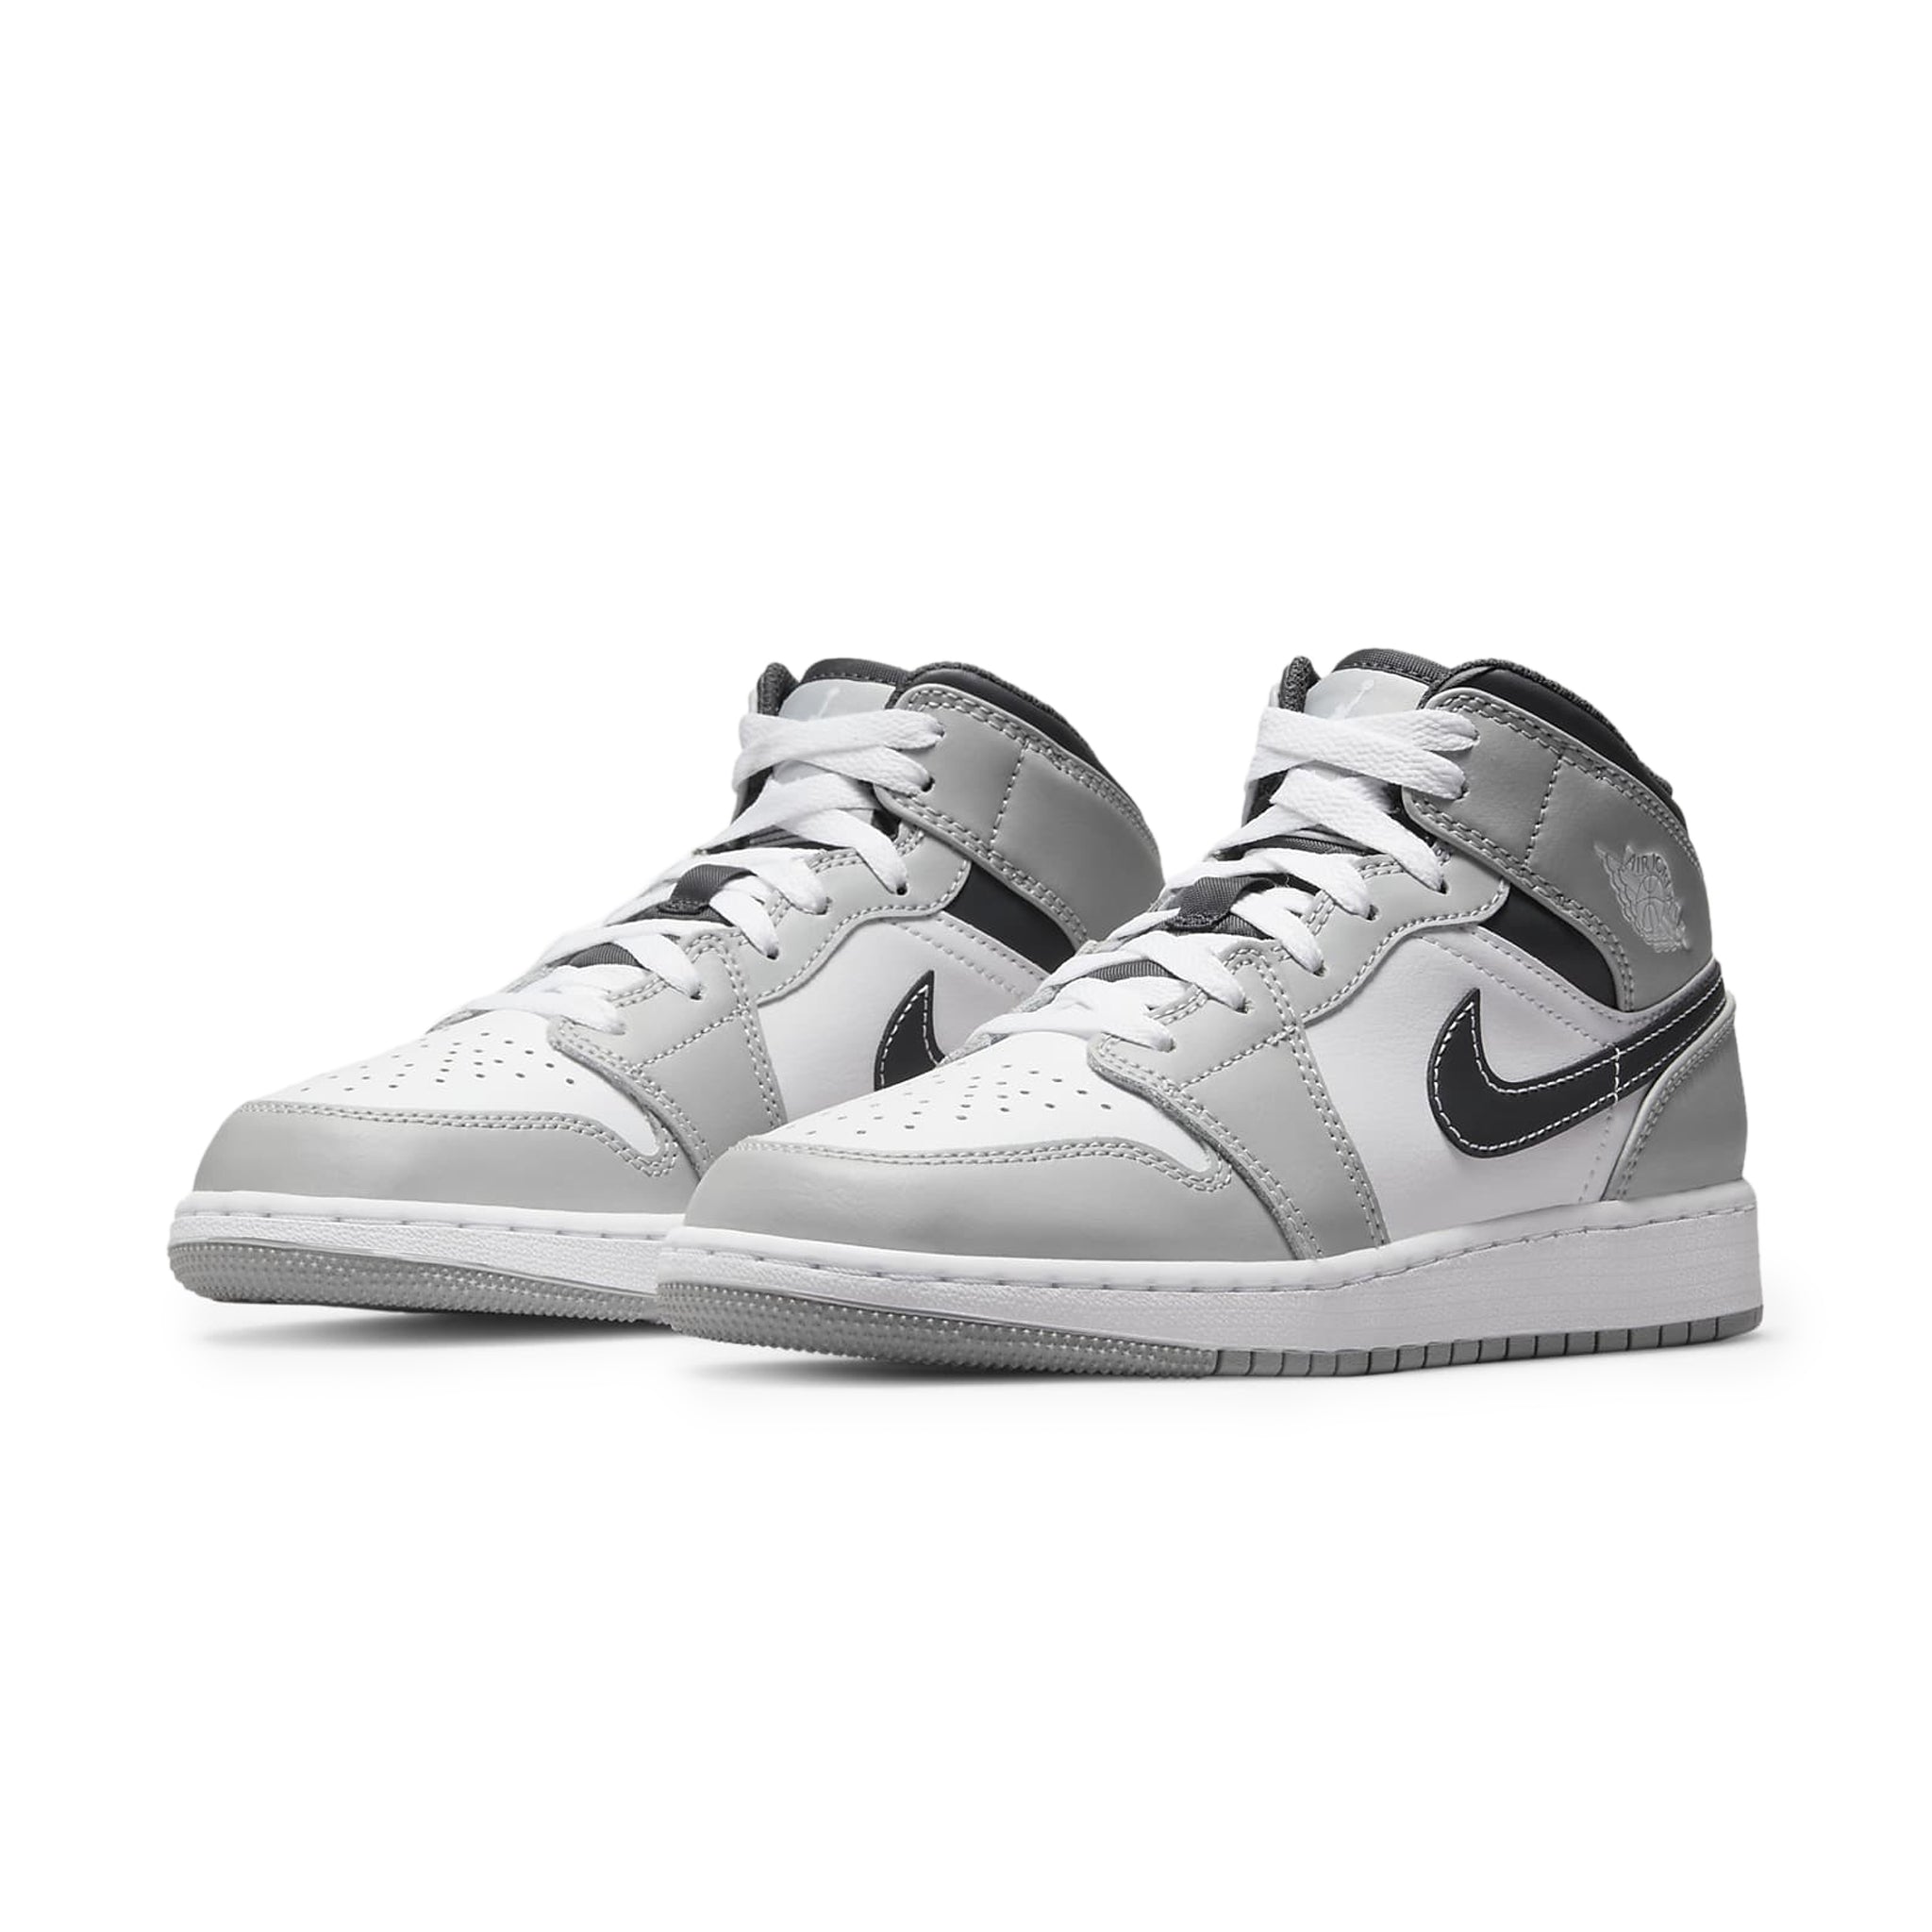 Front side view of Air Jordan 1 Mid Light Smoke Grey Anthracite (GS) 554725-078